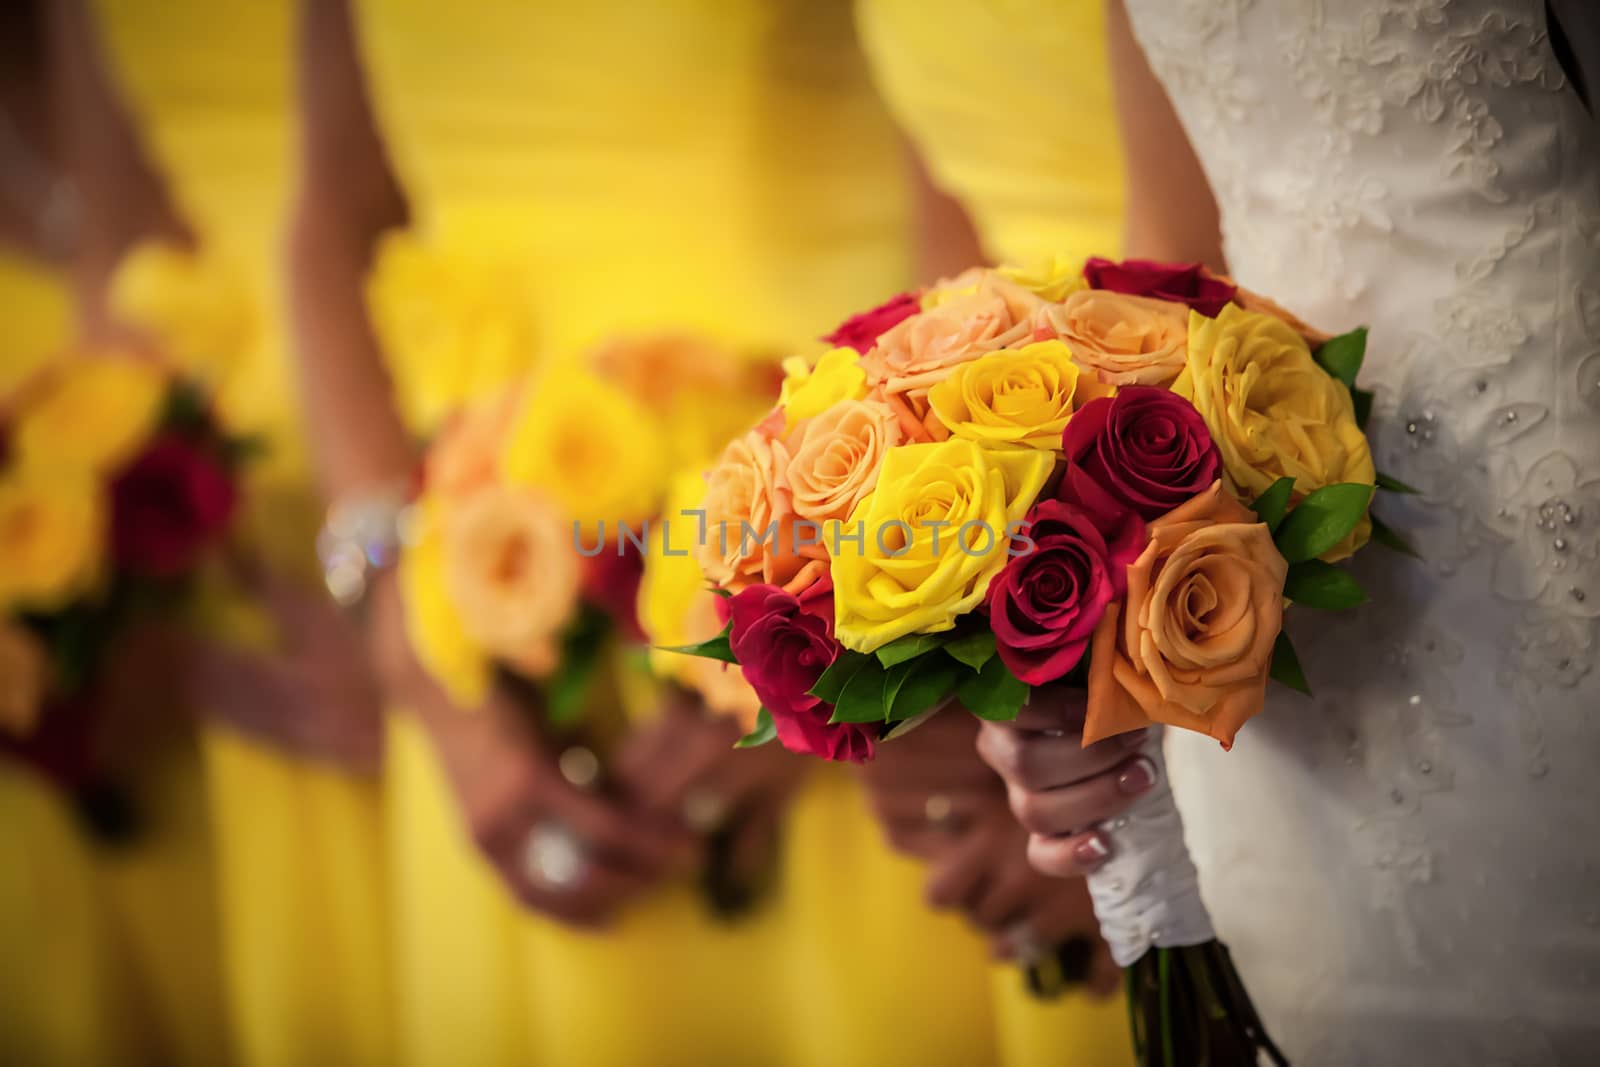 Bride Holding Bouquet with Bridesmaids in Background by salejandro